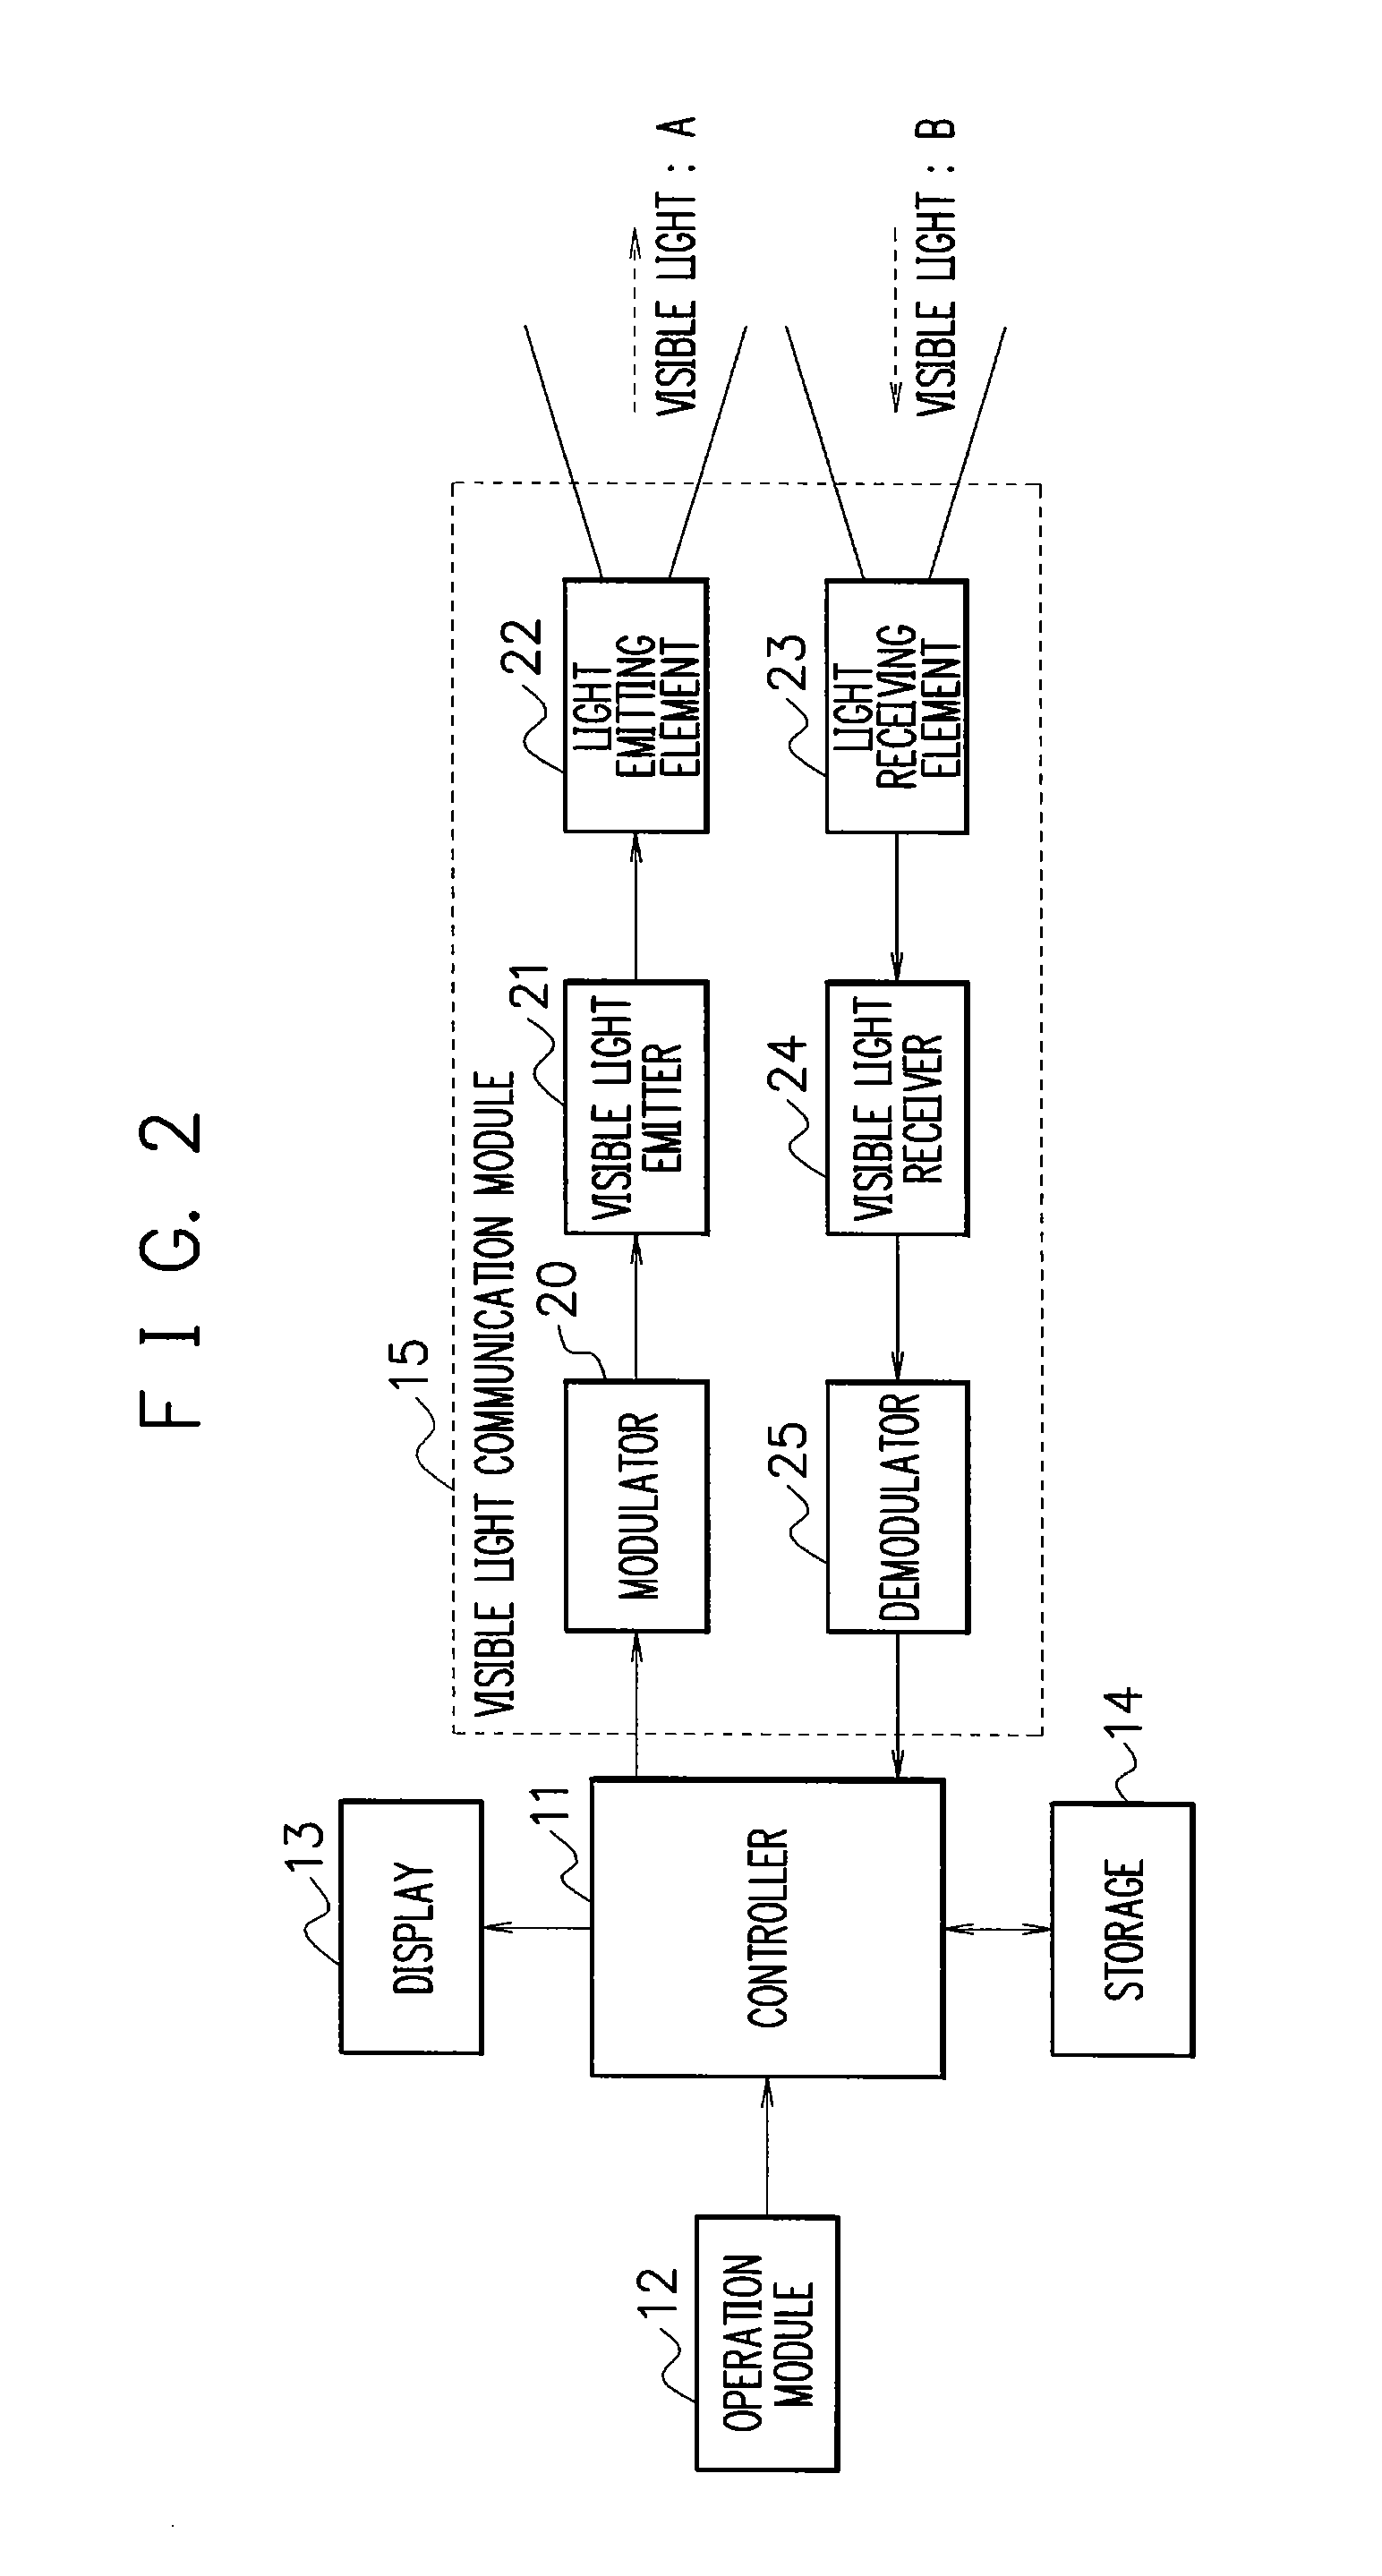 Apparatus, system, method, and program for visible light communication